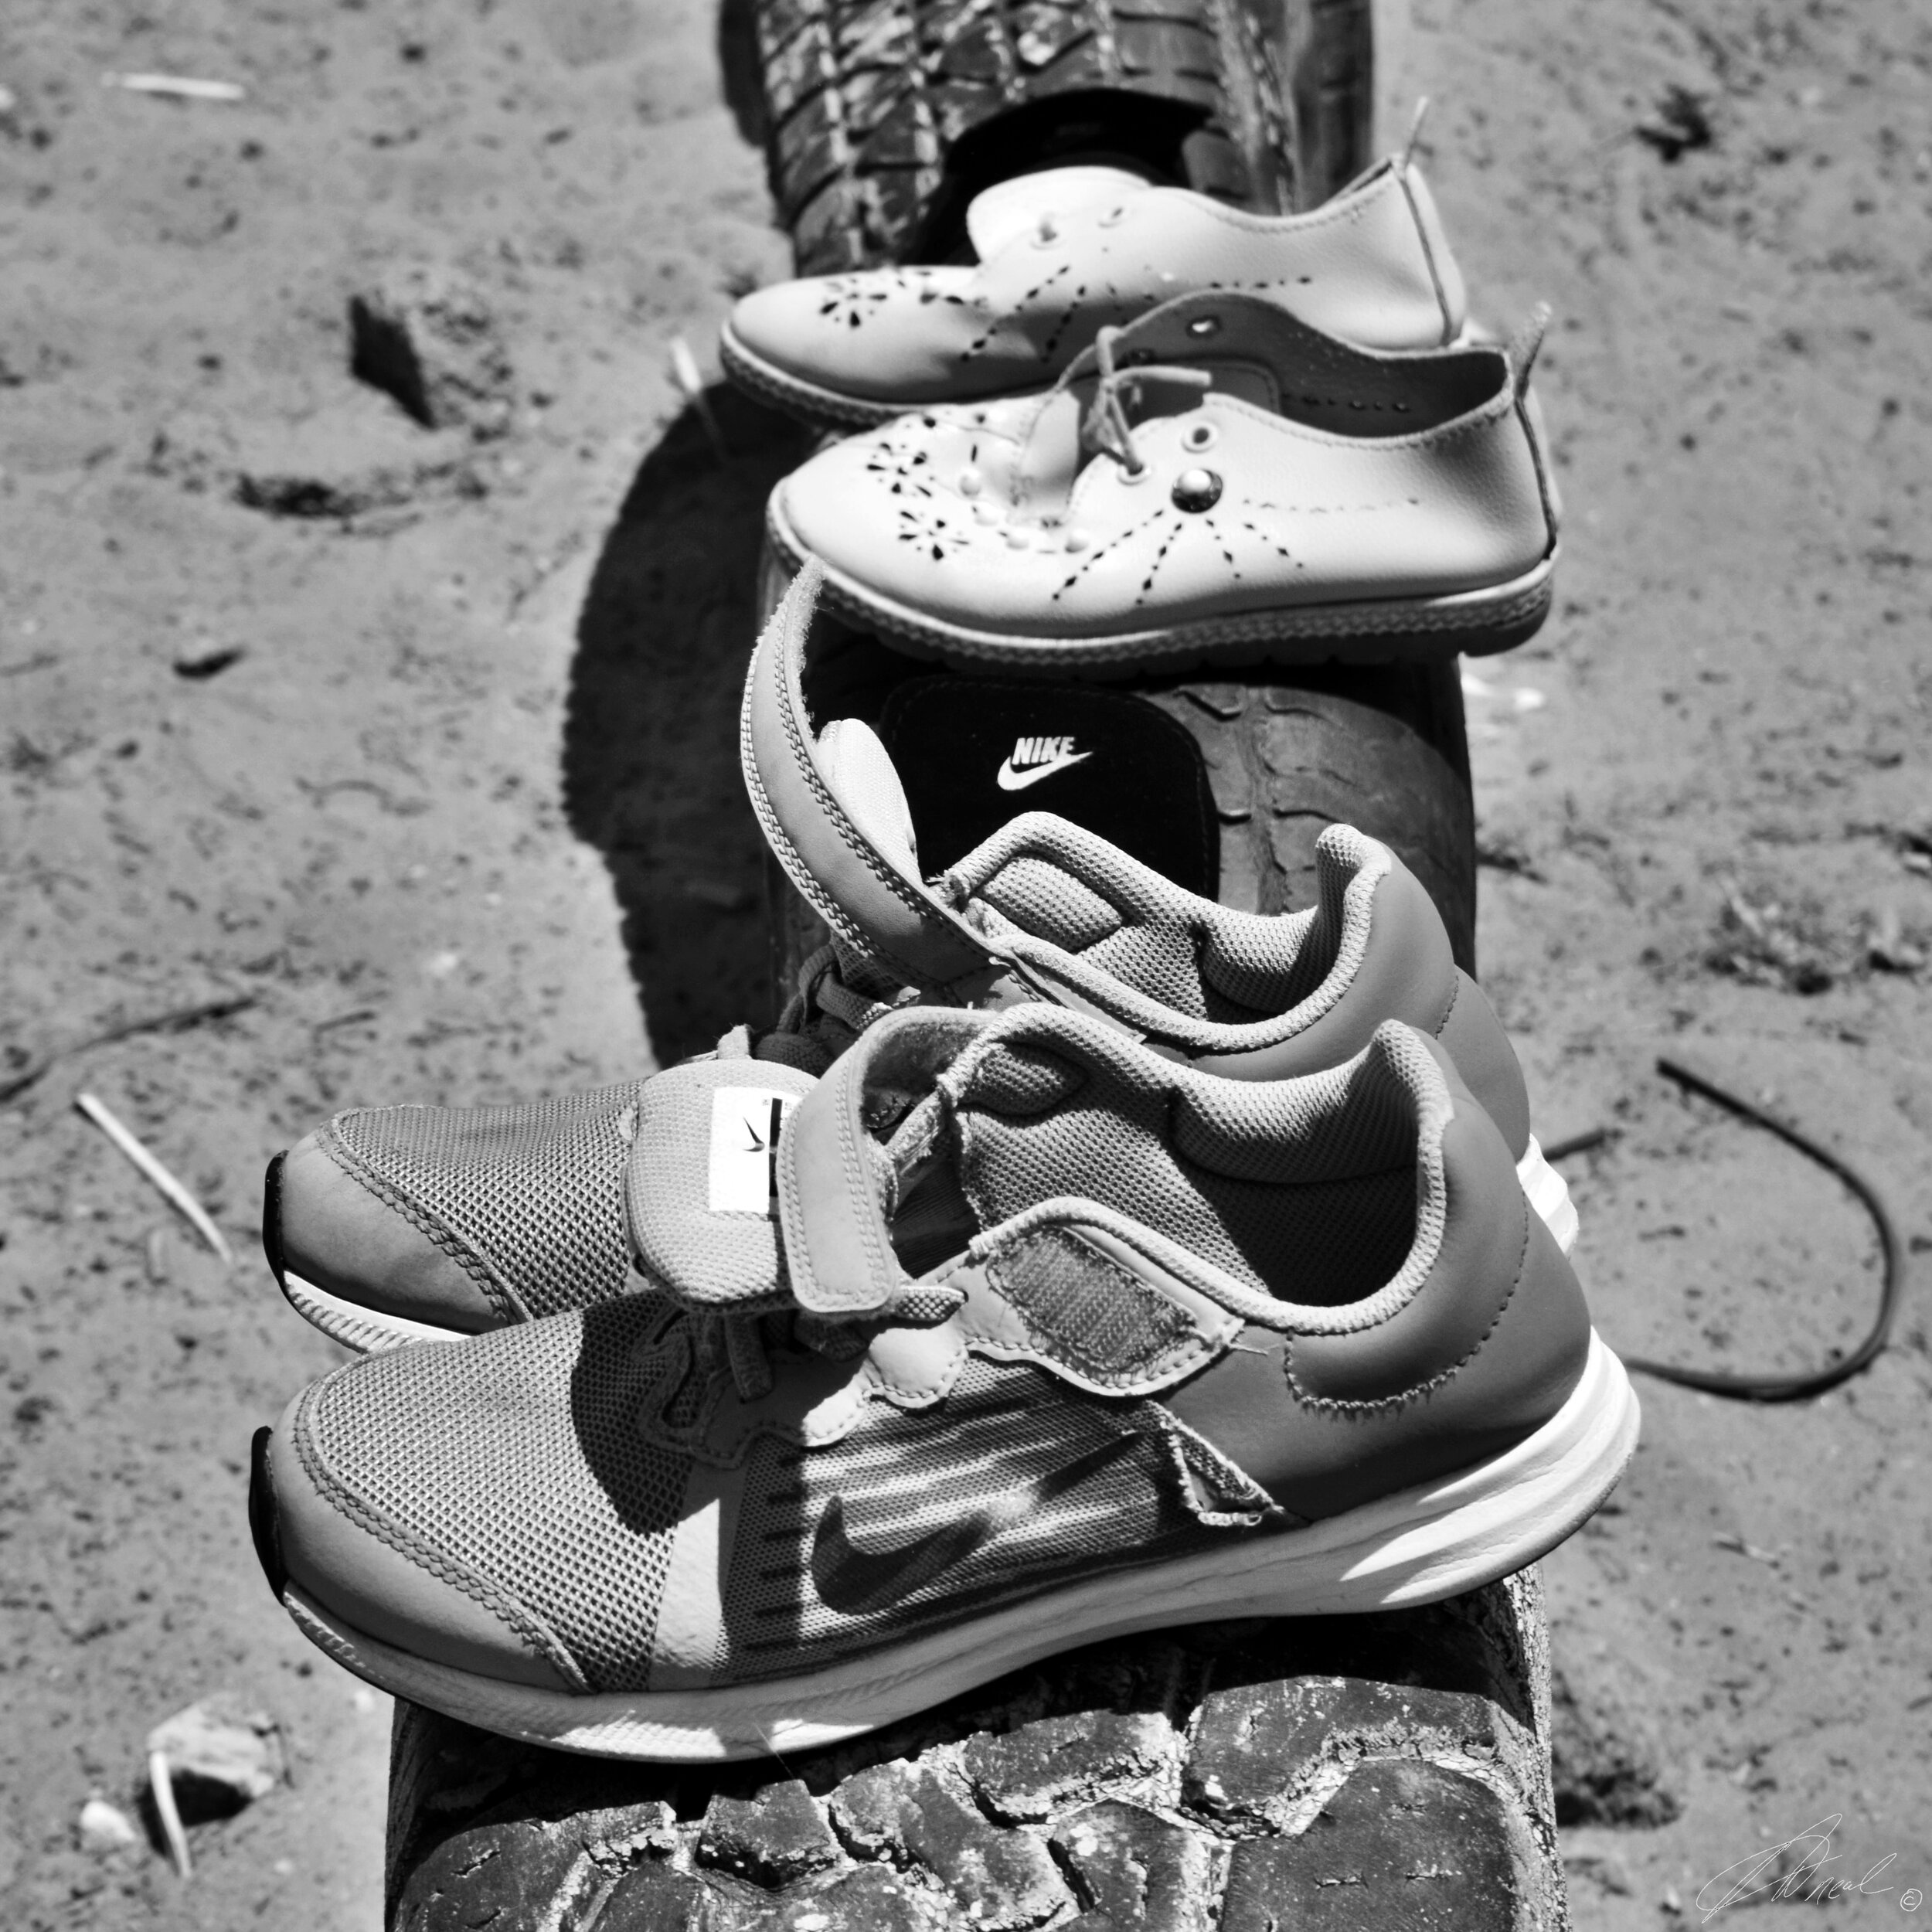 Shoes of the displaced. 